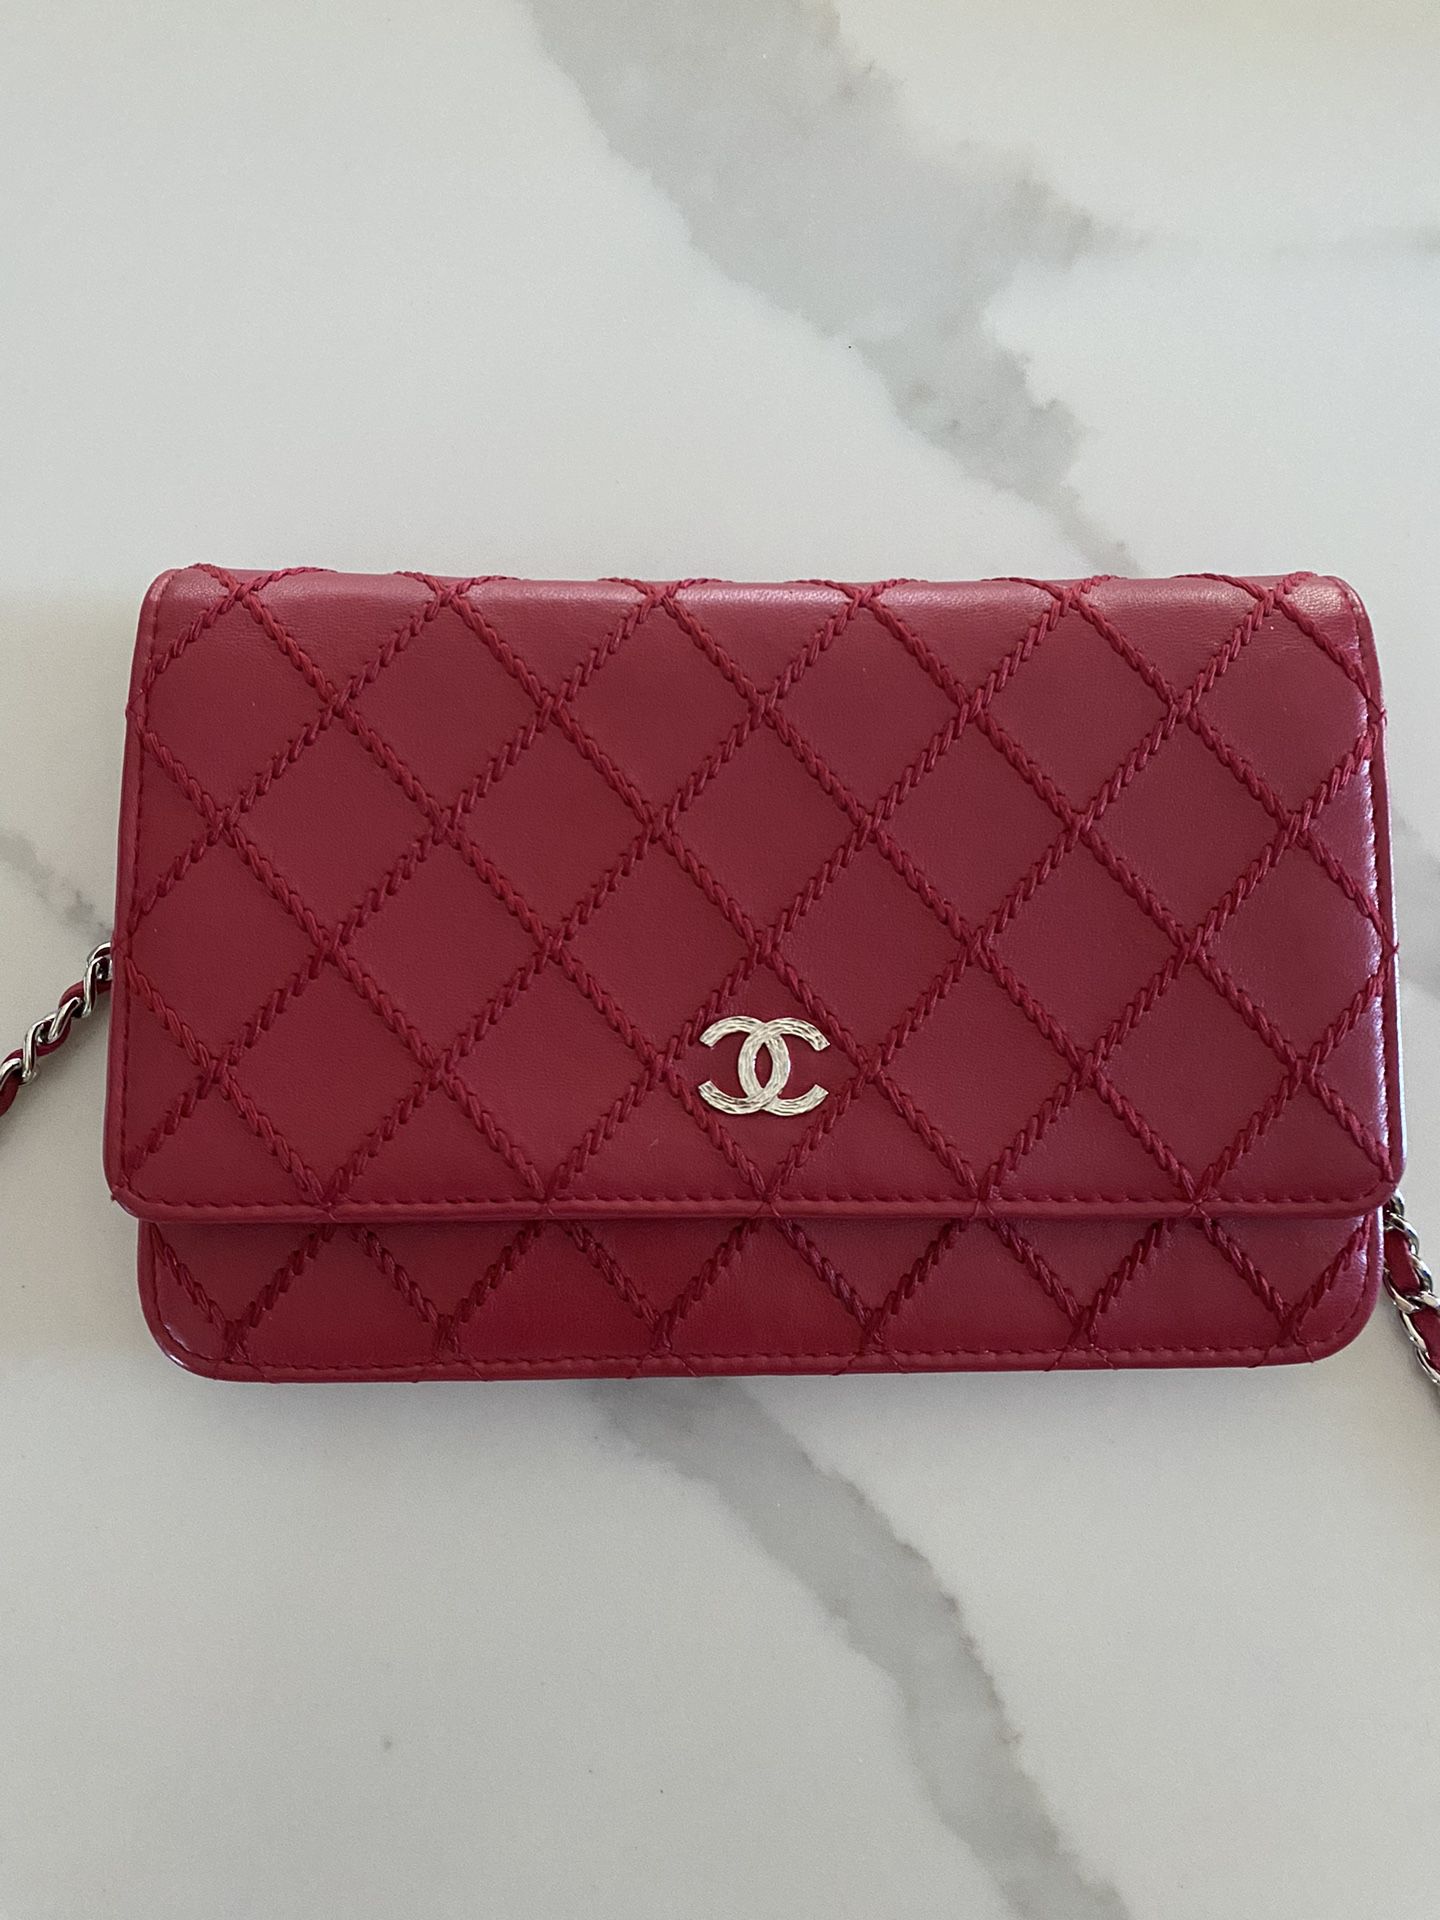 Authentic Chanel Wallet On Chain for Sale in Brentwood, CA - OfferUp